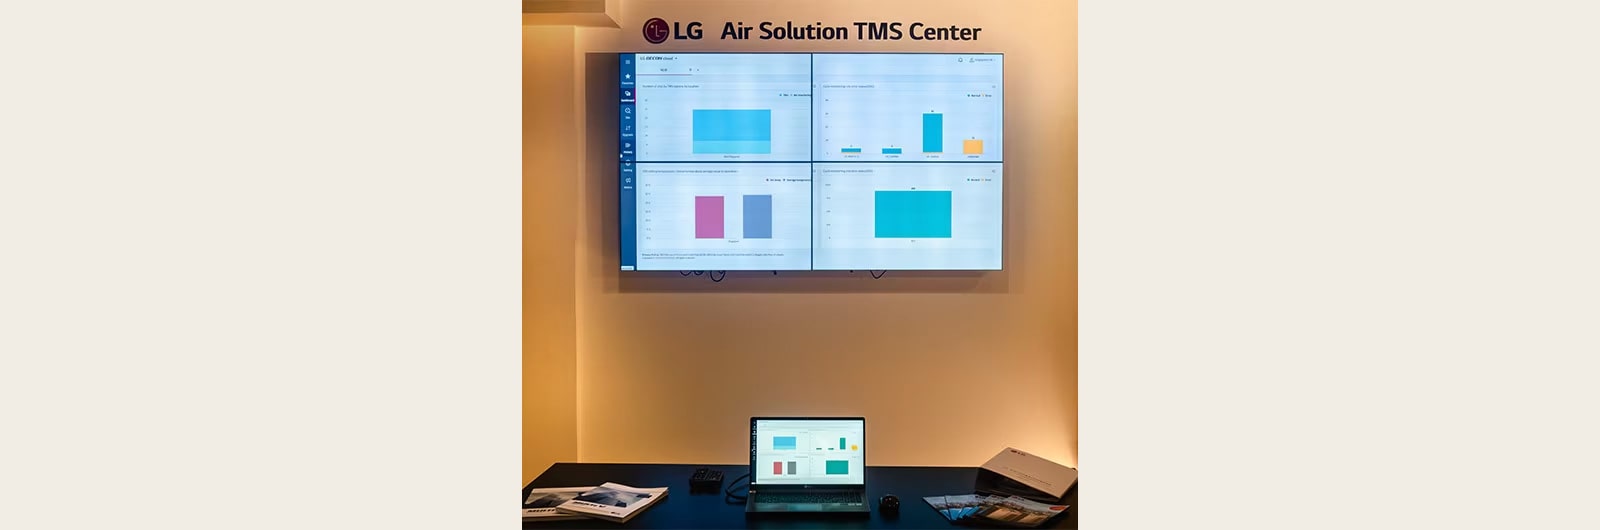 HVAC System is remotely monitored at LG’S Air Solution TMS Center 